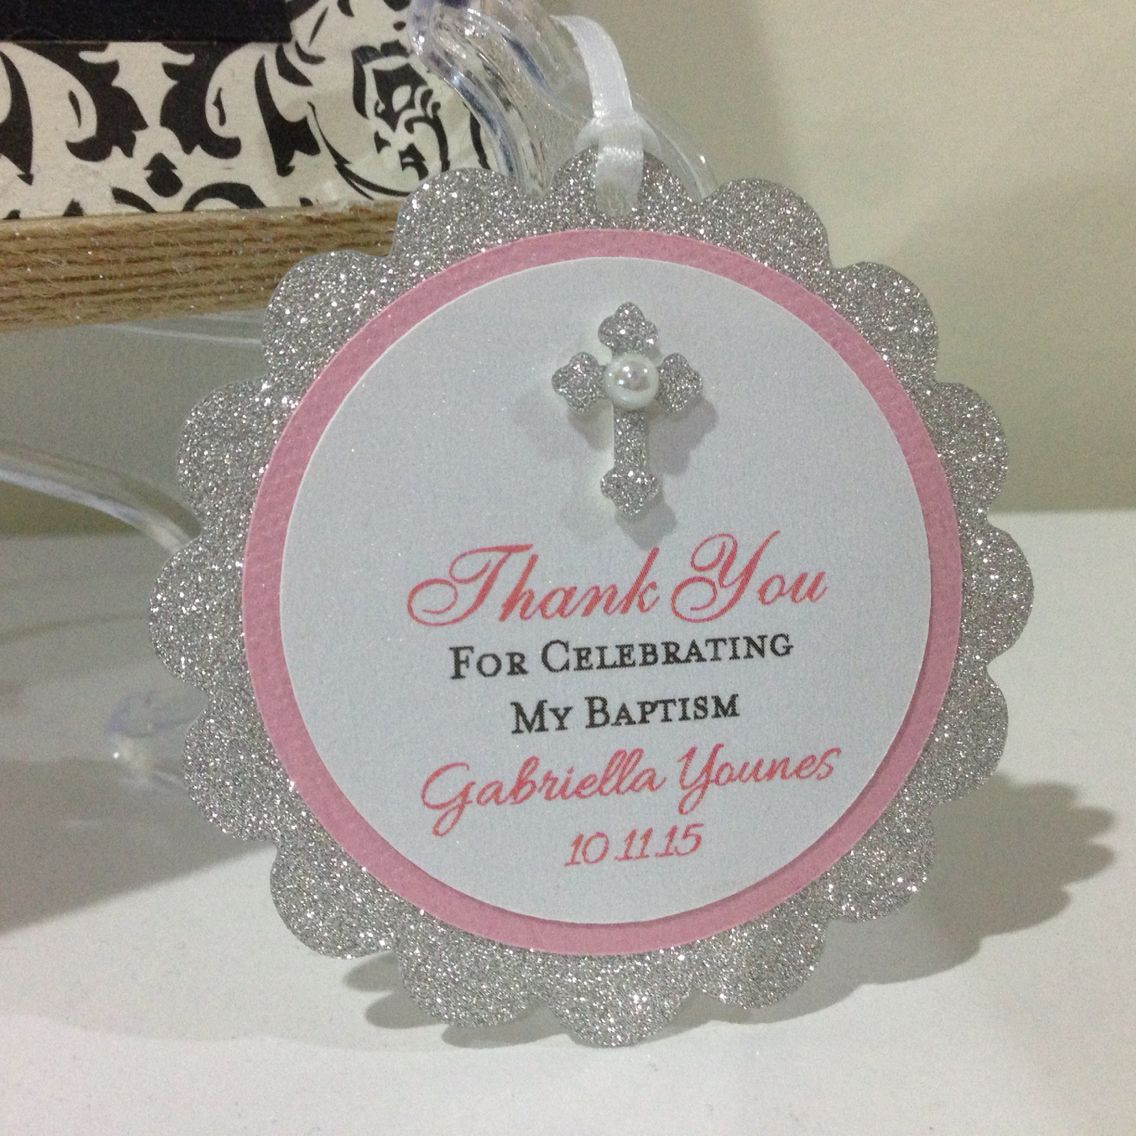 Gift Ideas For Baptism Baby Girl
 Baptism Favor Tags for a baby girl Handmade by